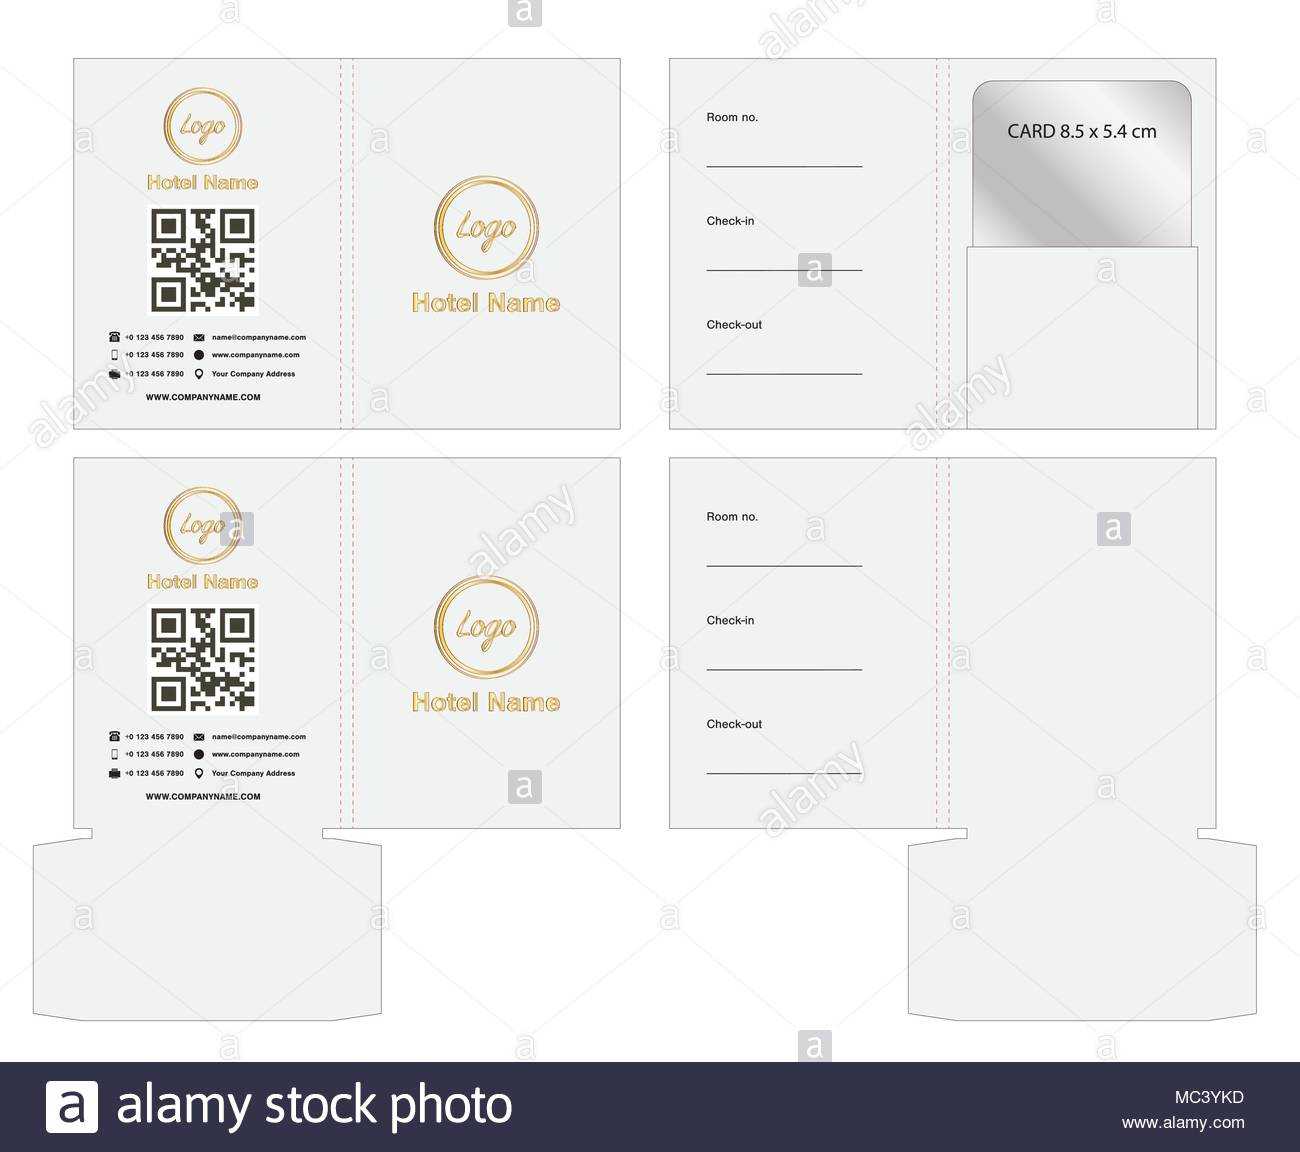 Key Card Envelope Die Cut Template Mock Up Illustration With Regard To Hotel Key Card Template